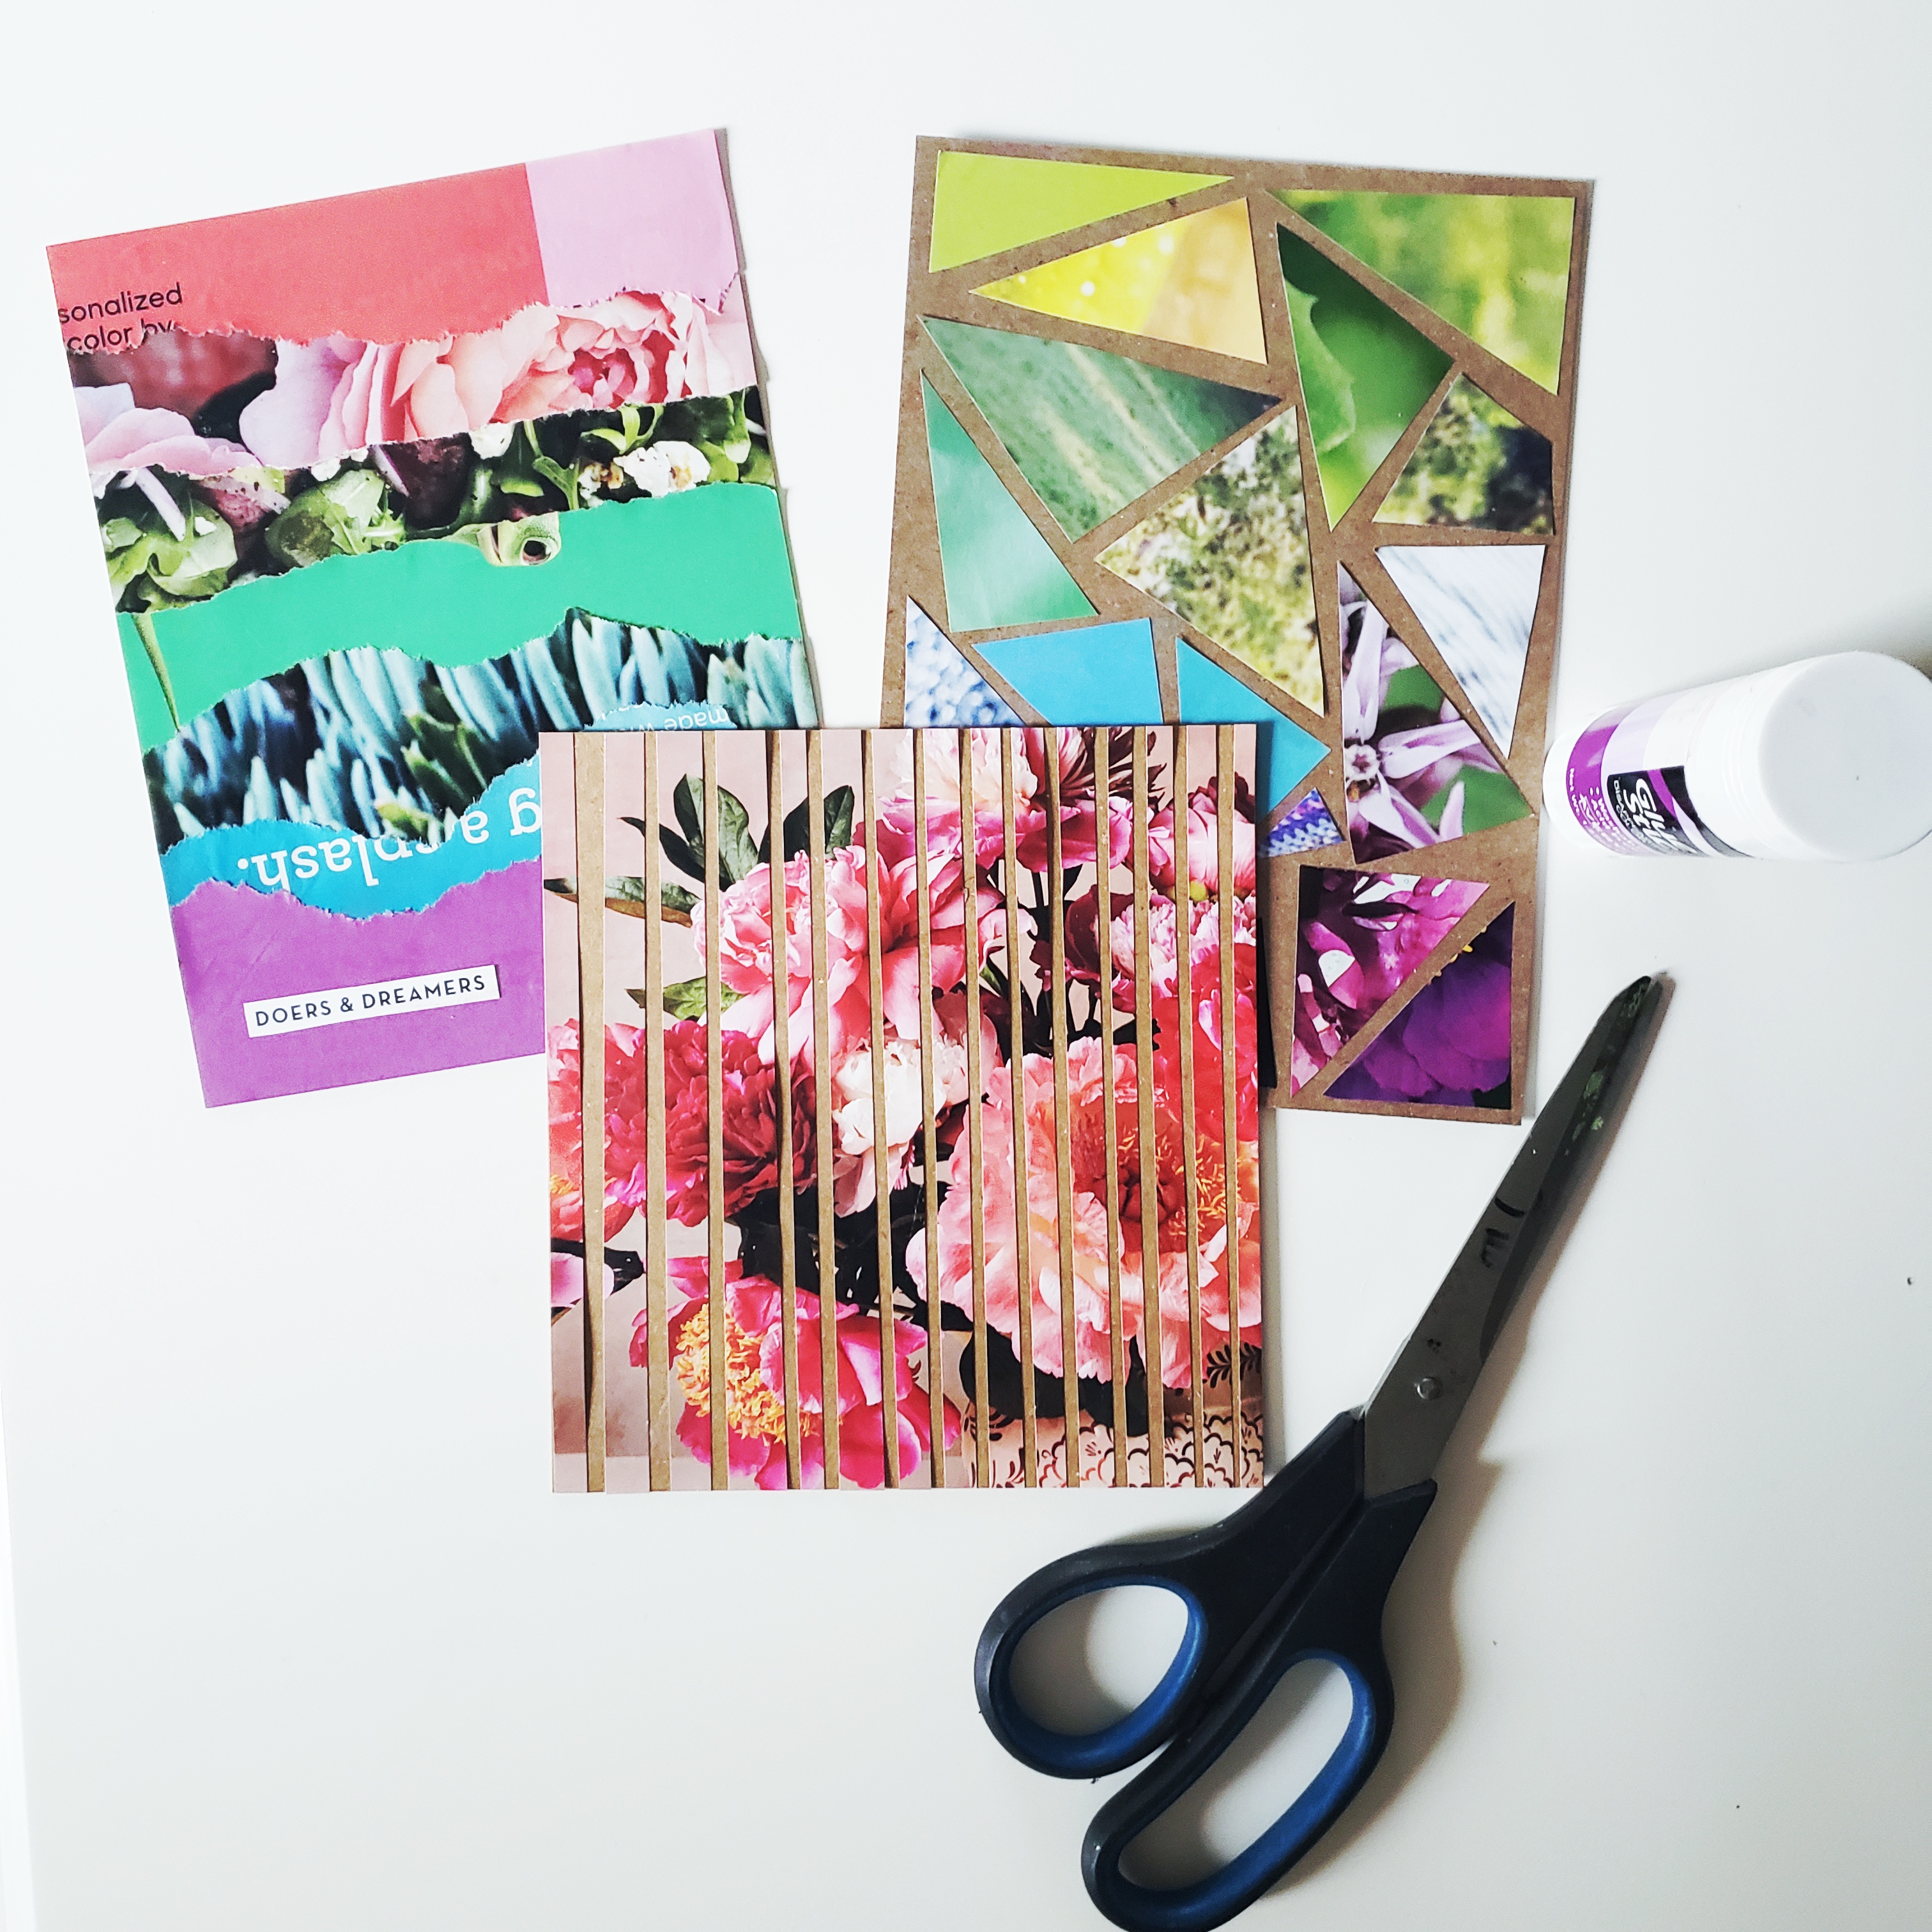 free upcycled collage class